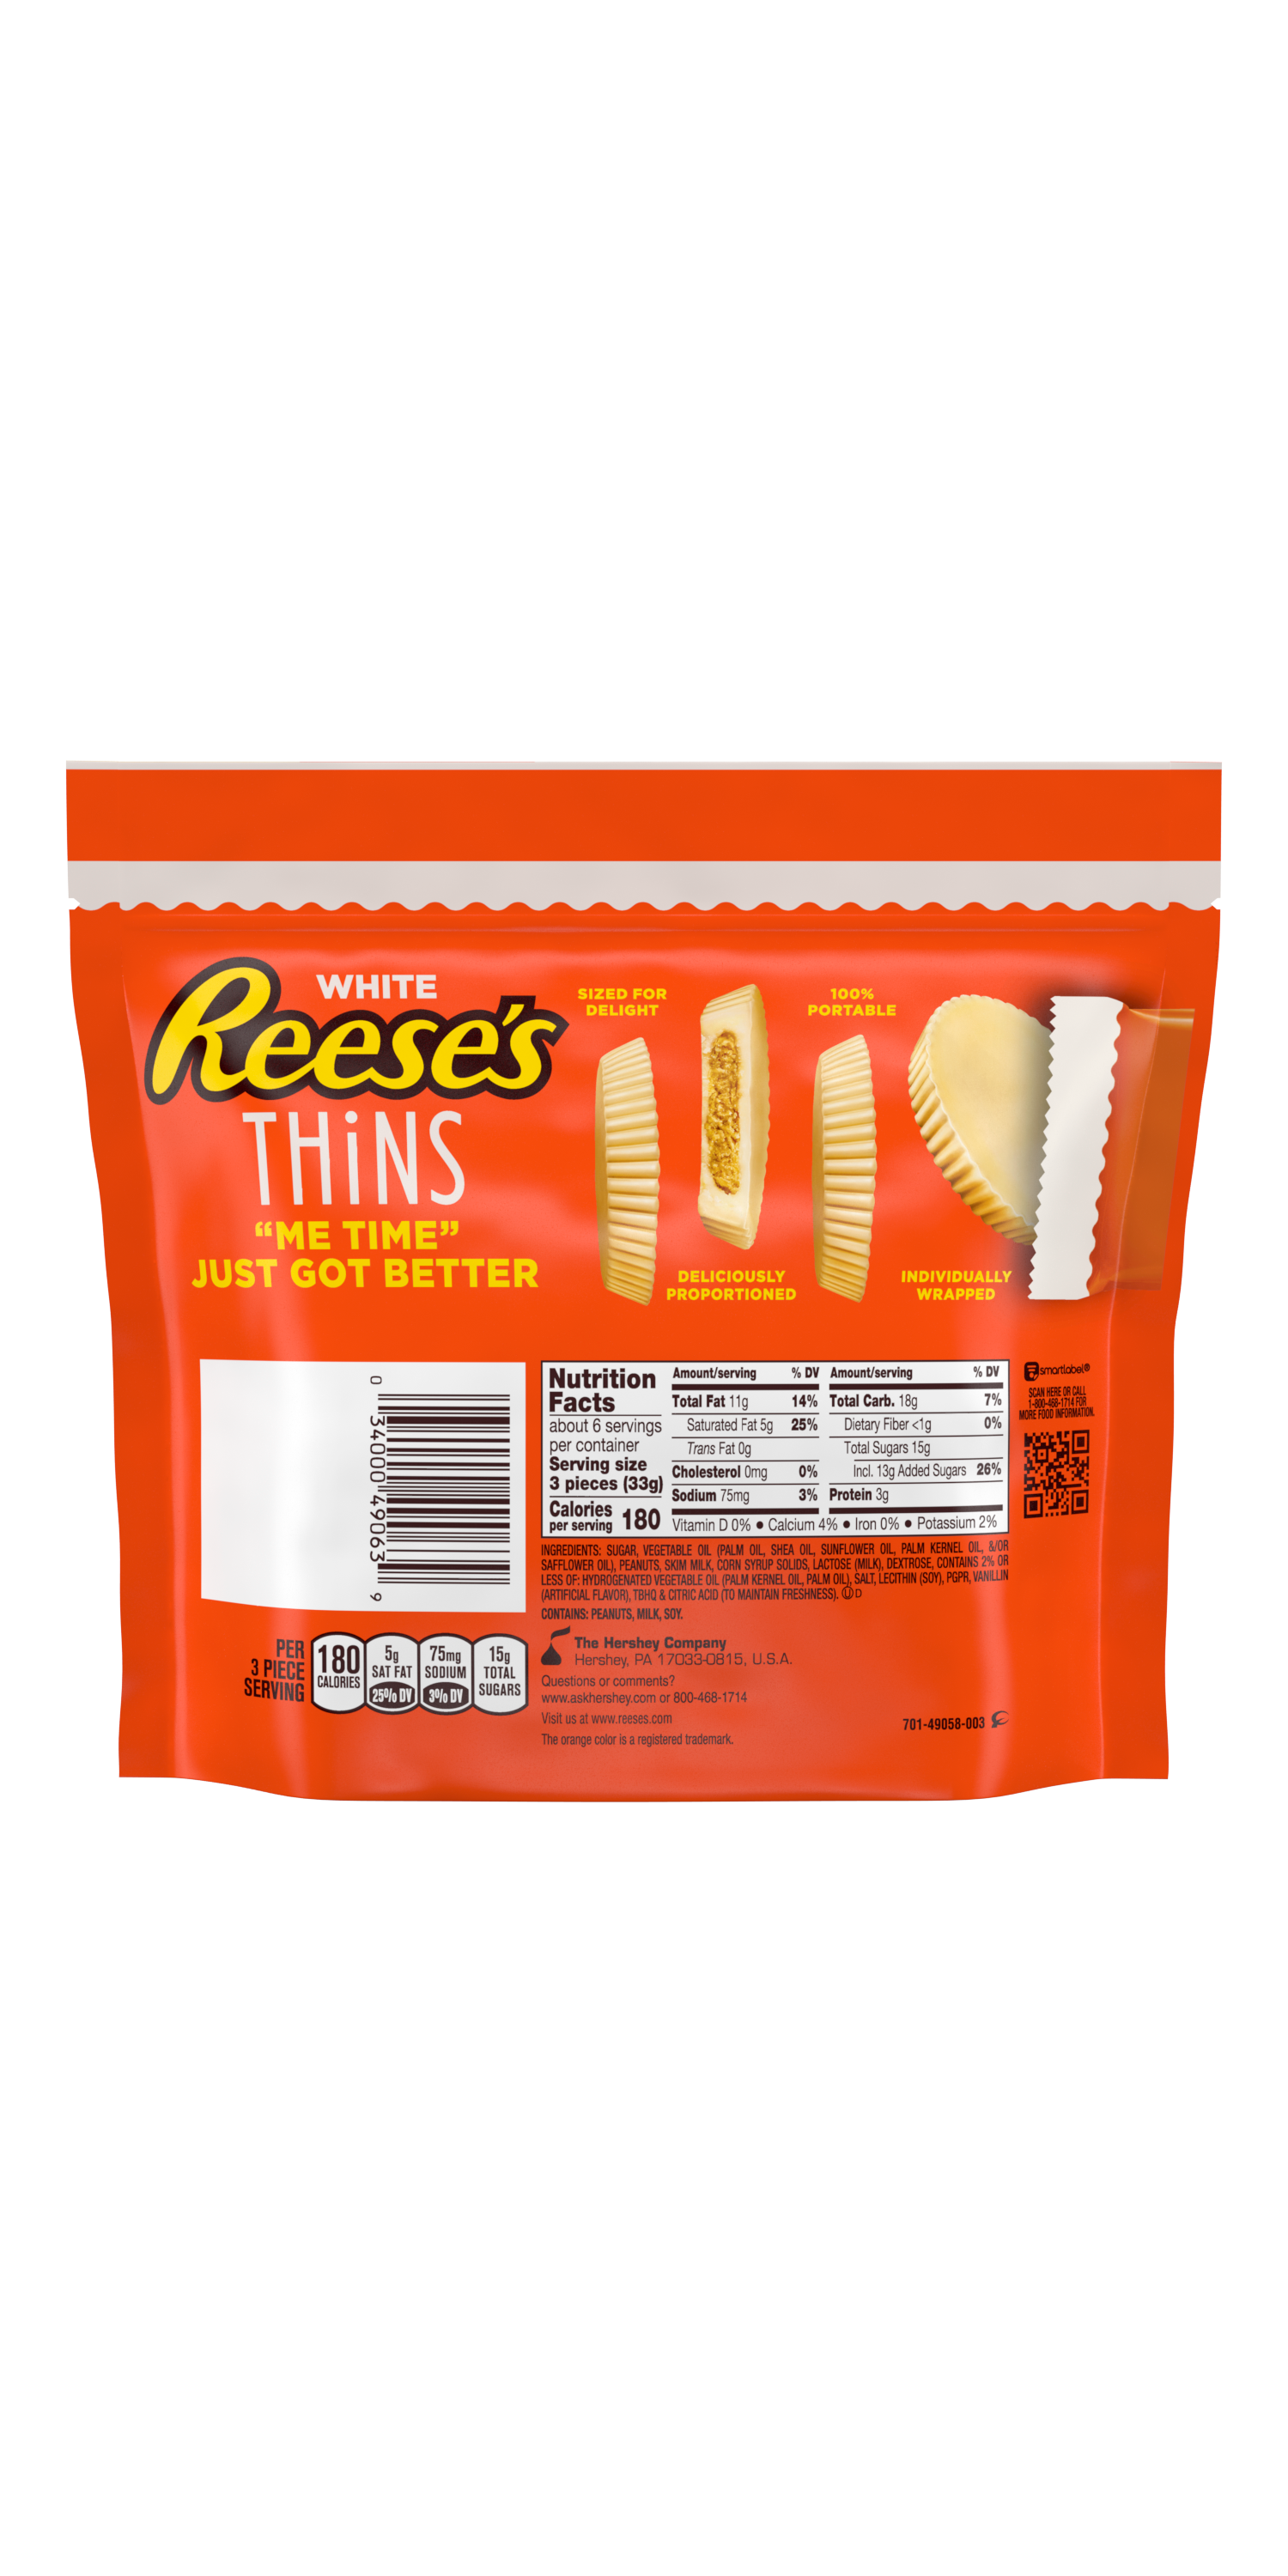 REESE'S THiNS White Creme Peanut Butter Cups, 7.37 oz pack - Back of Package